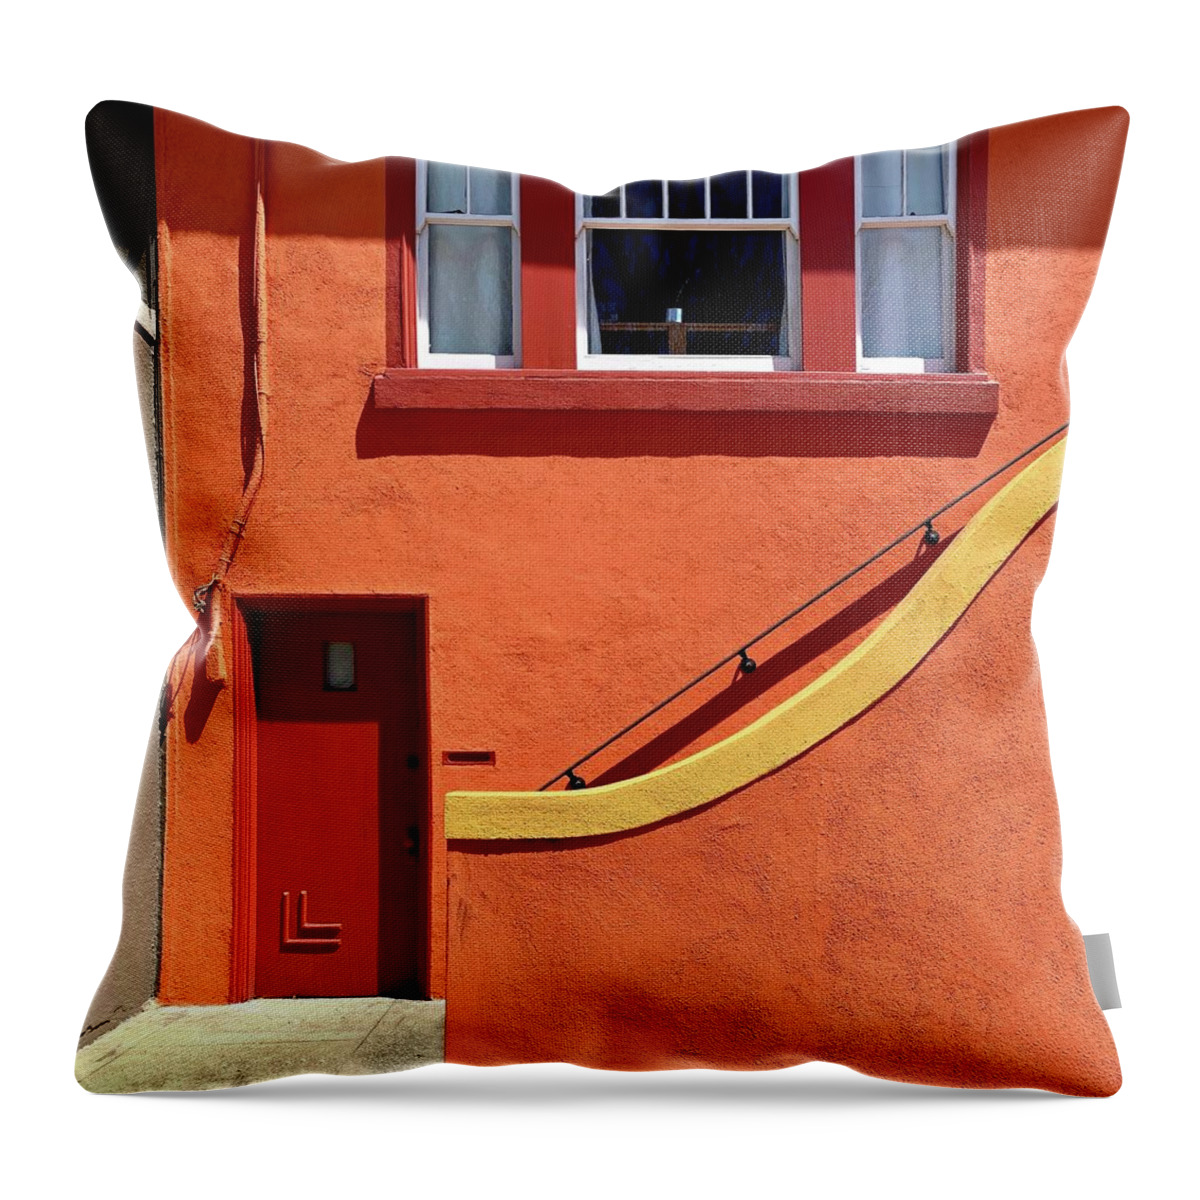  Throw Pillow featuring the photograph Orange Wall by Julie Gebhardt